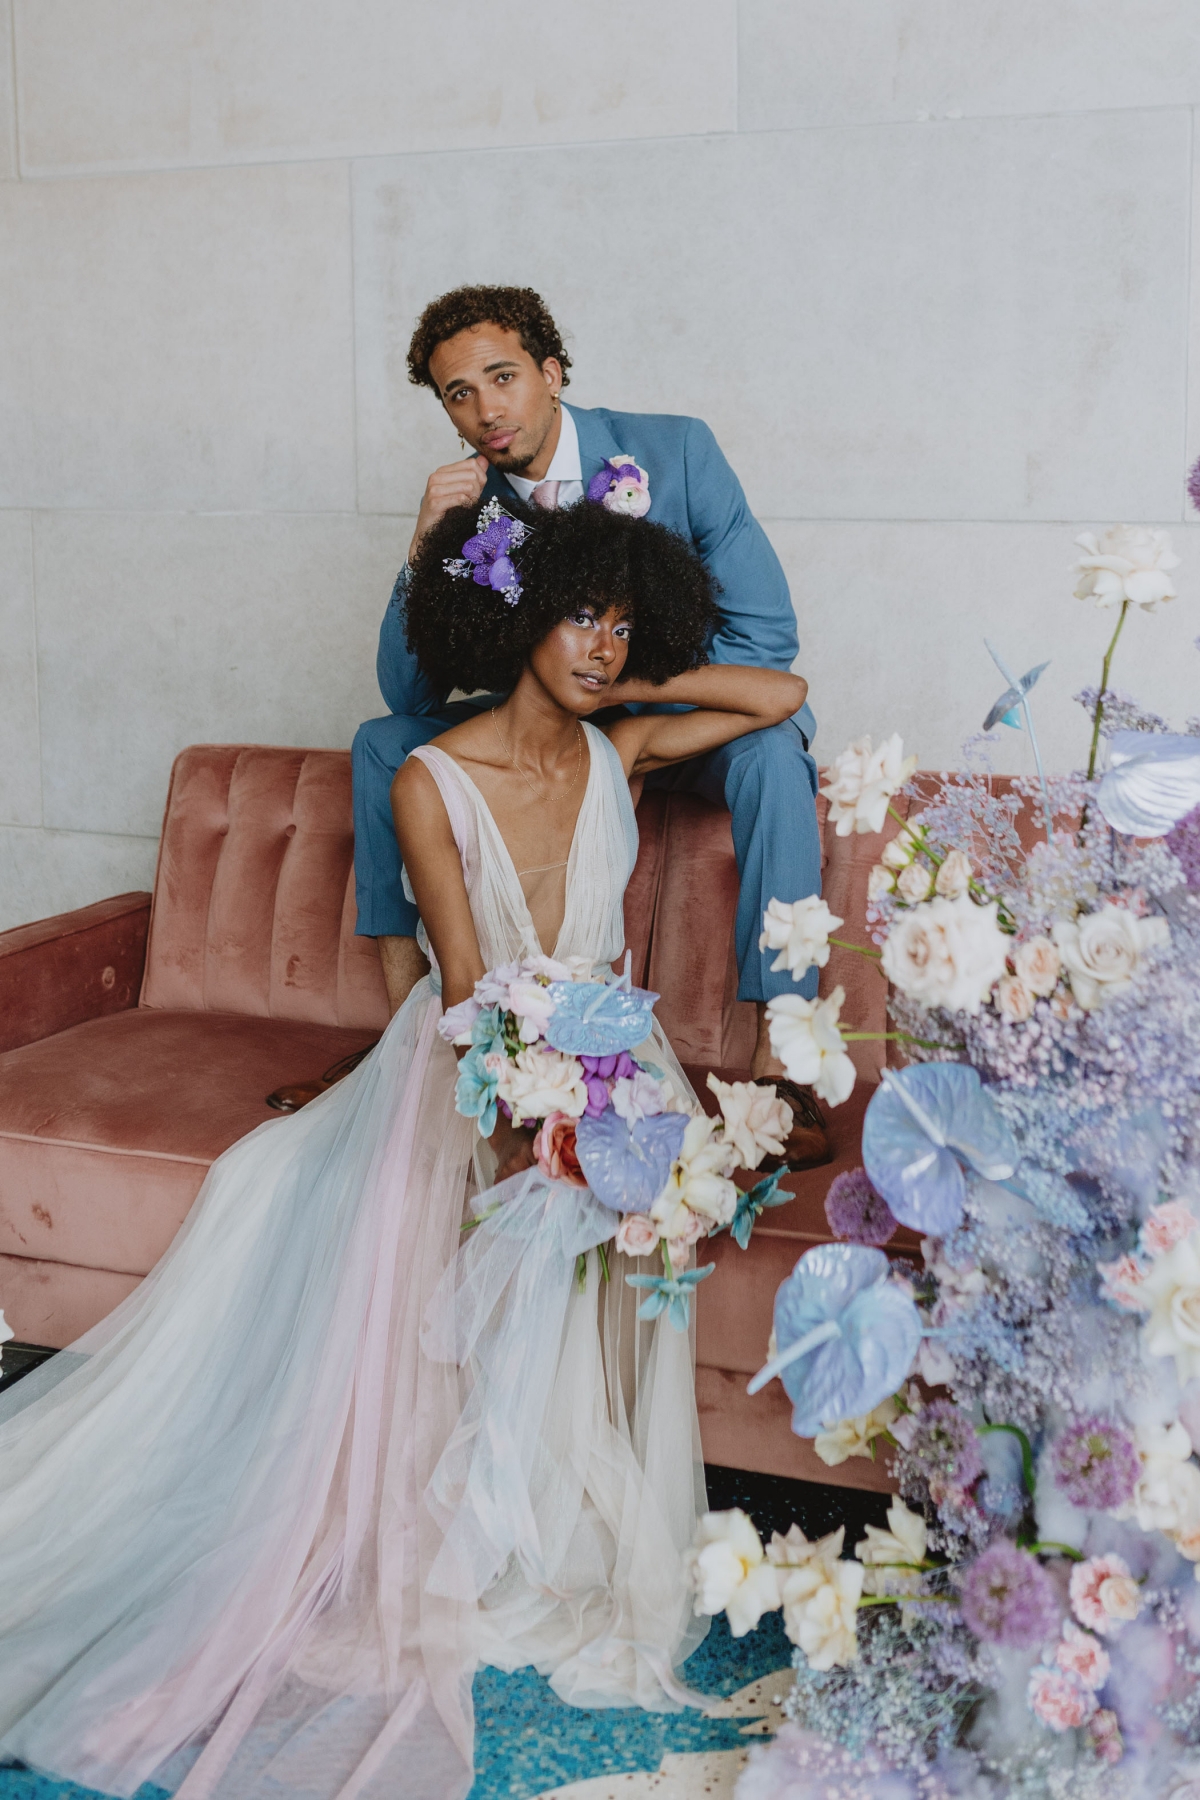 Beyond White: Explore The Allure of Colored Wedding Gowns